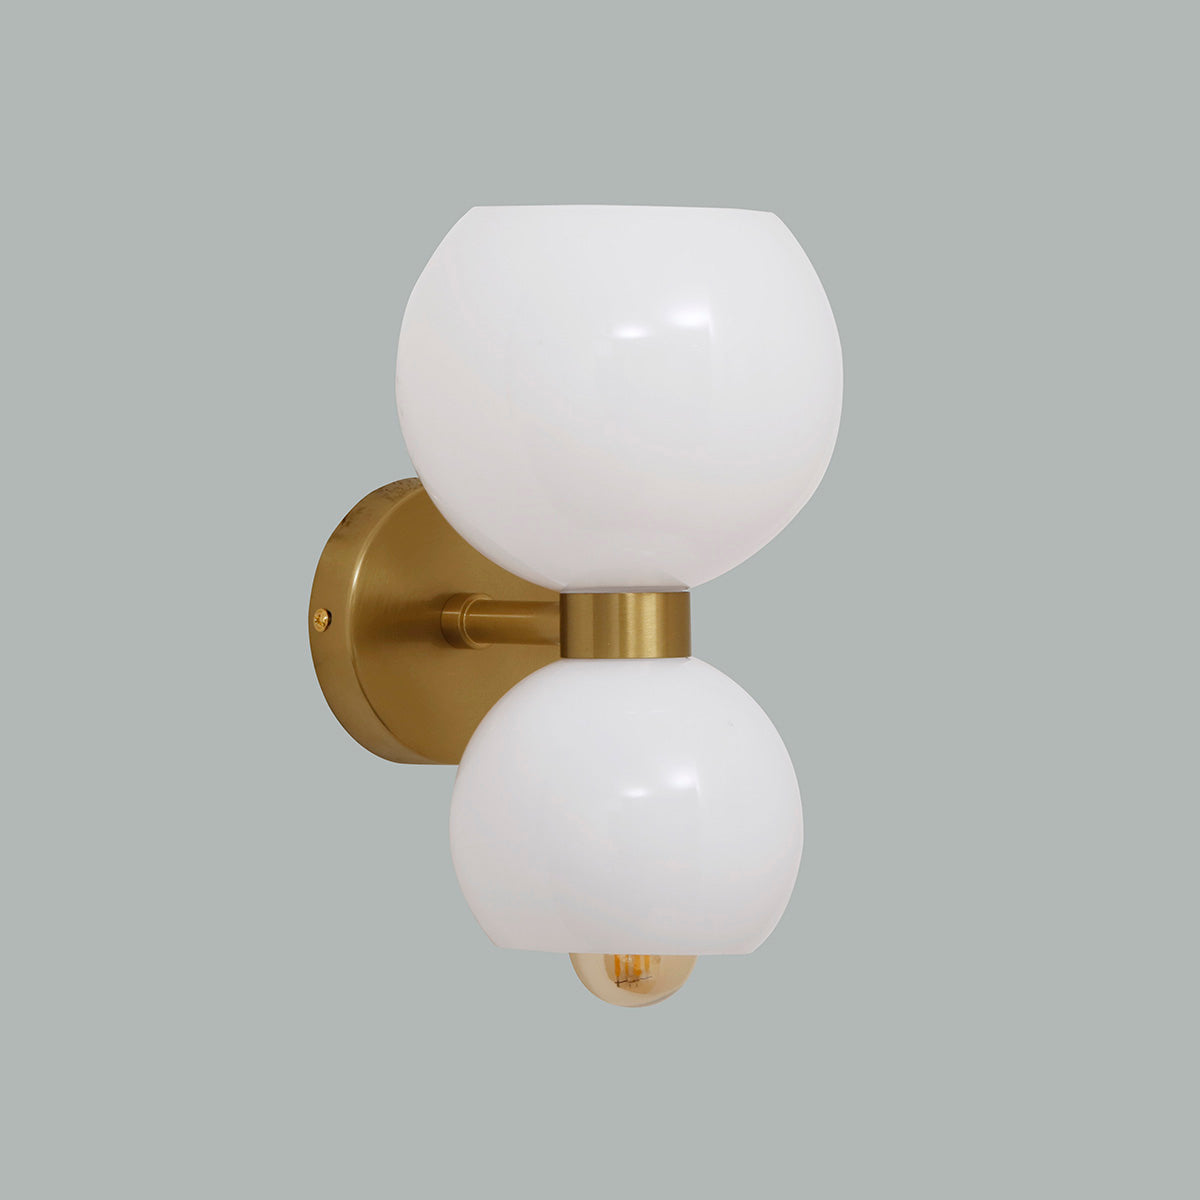 Shop Ticket To Heaven White Wall Light Interior Lights